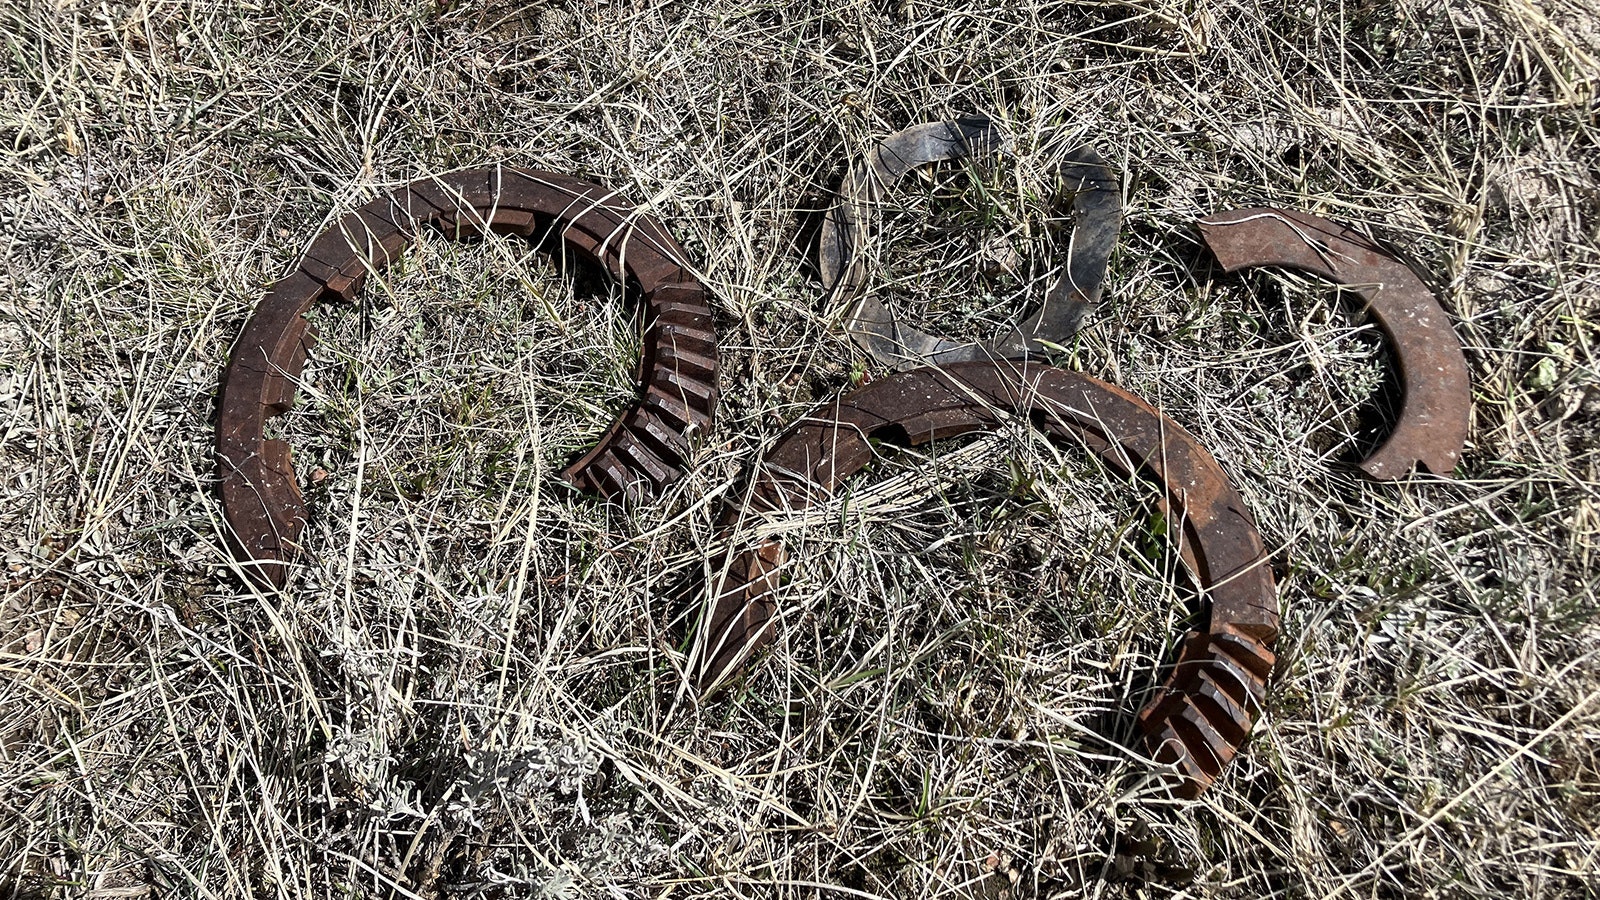 Geared parts from the B-24 lay at the crash site south of Casper. Research Mark Milliken believes they could have been a part associated with the propeller-pitch assembly.